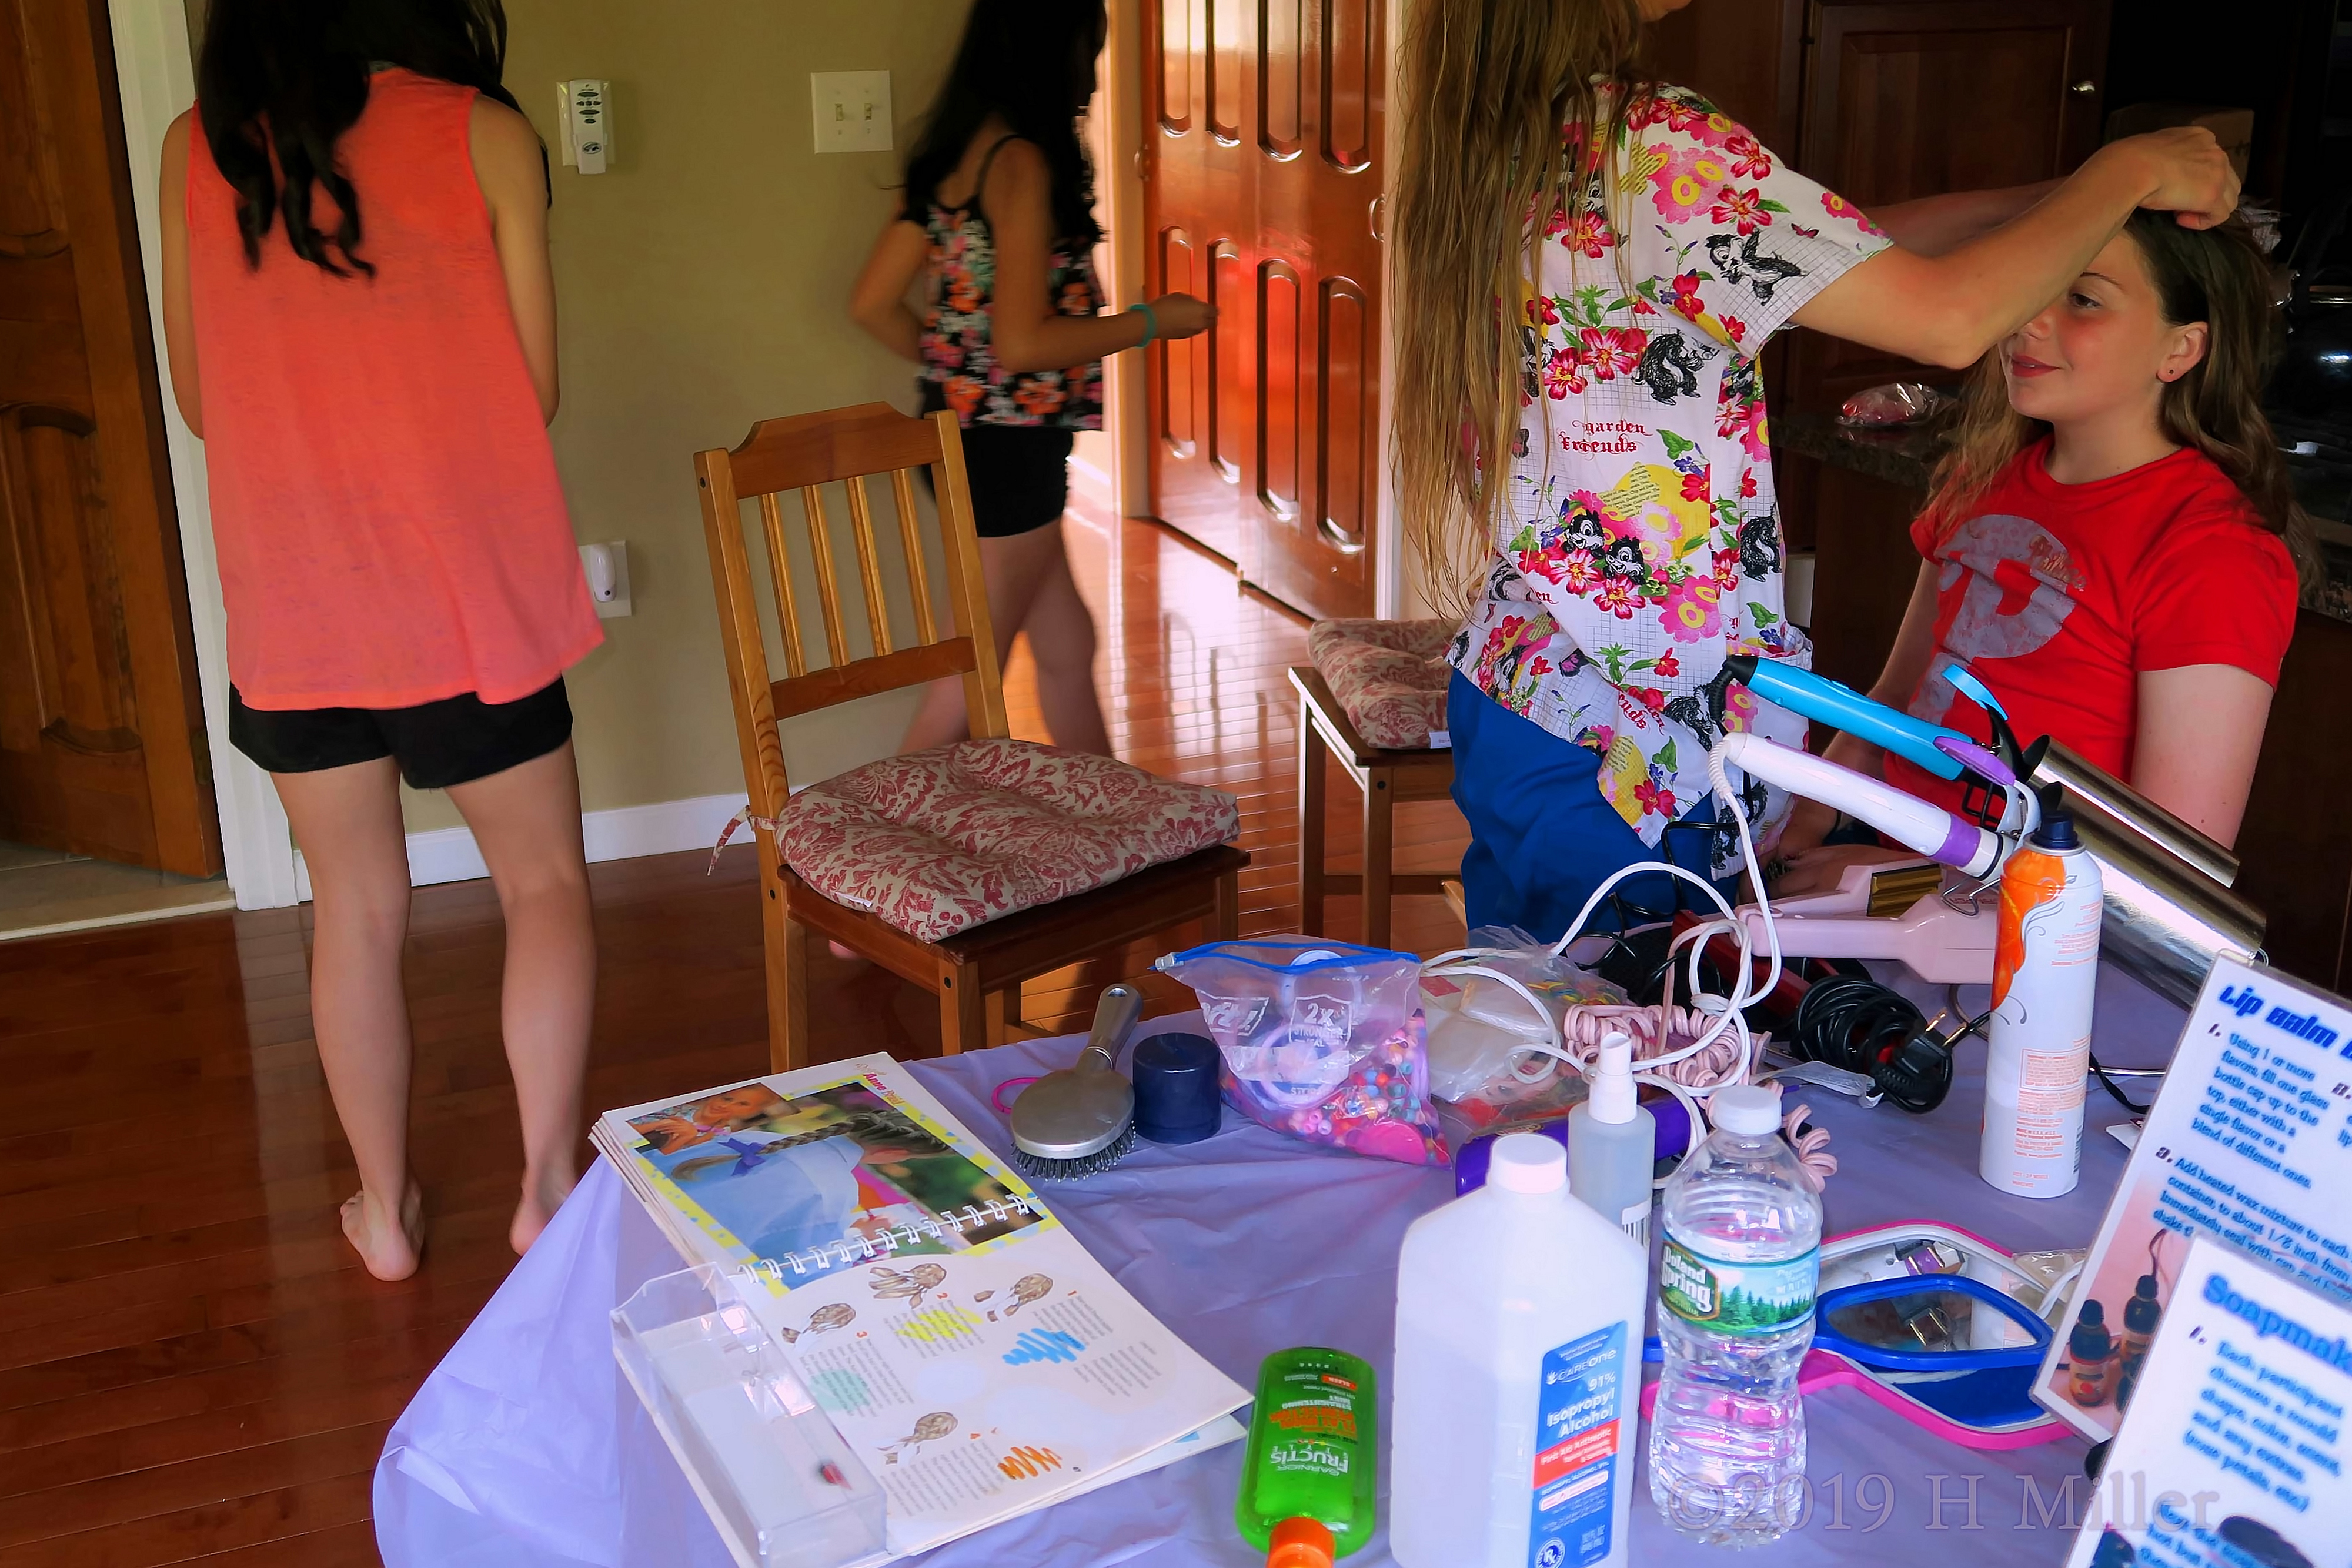 Spa Parties Offer So Many Activities For The Girls To Explore!